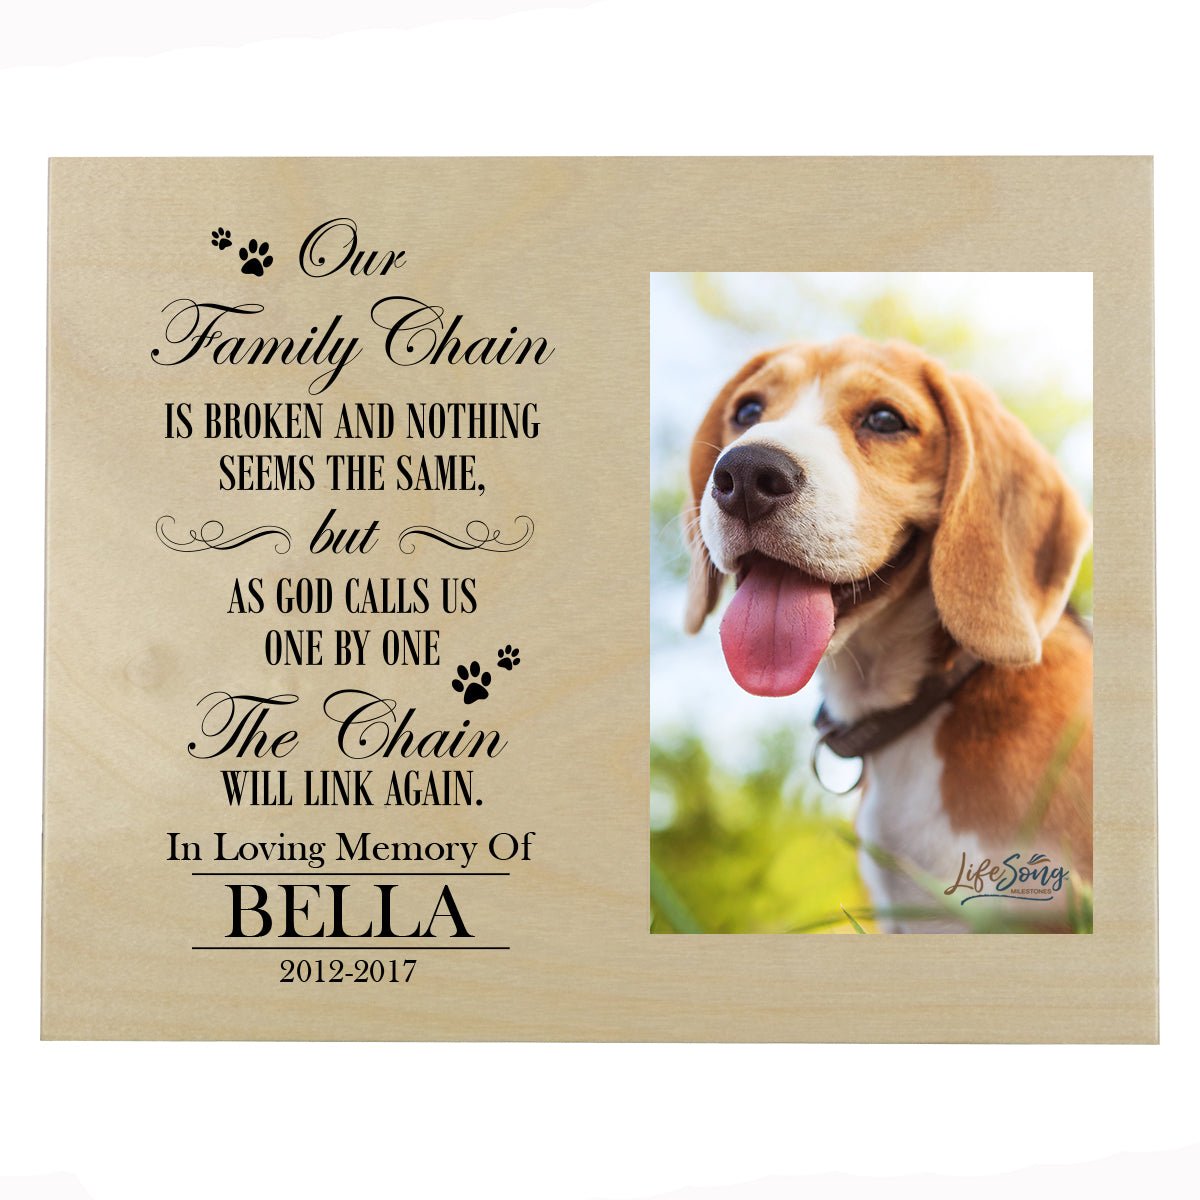 Pet Memorial Photo Wall Plaque Décor - Our Family Chain Is Broken - LifeSong Milestones